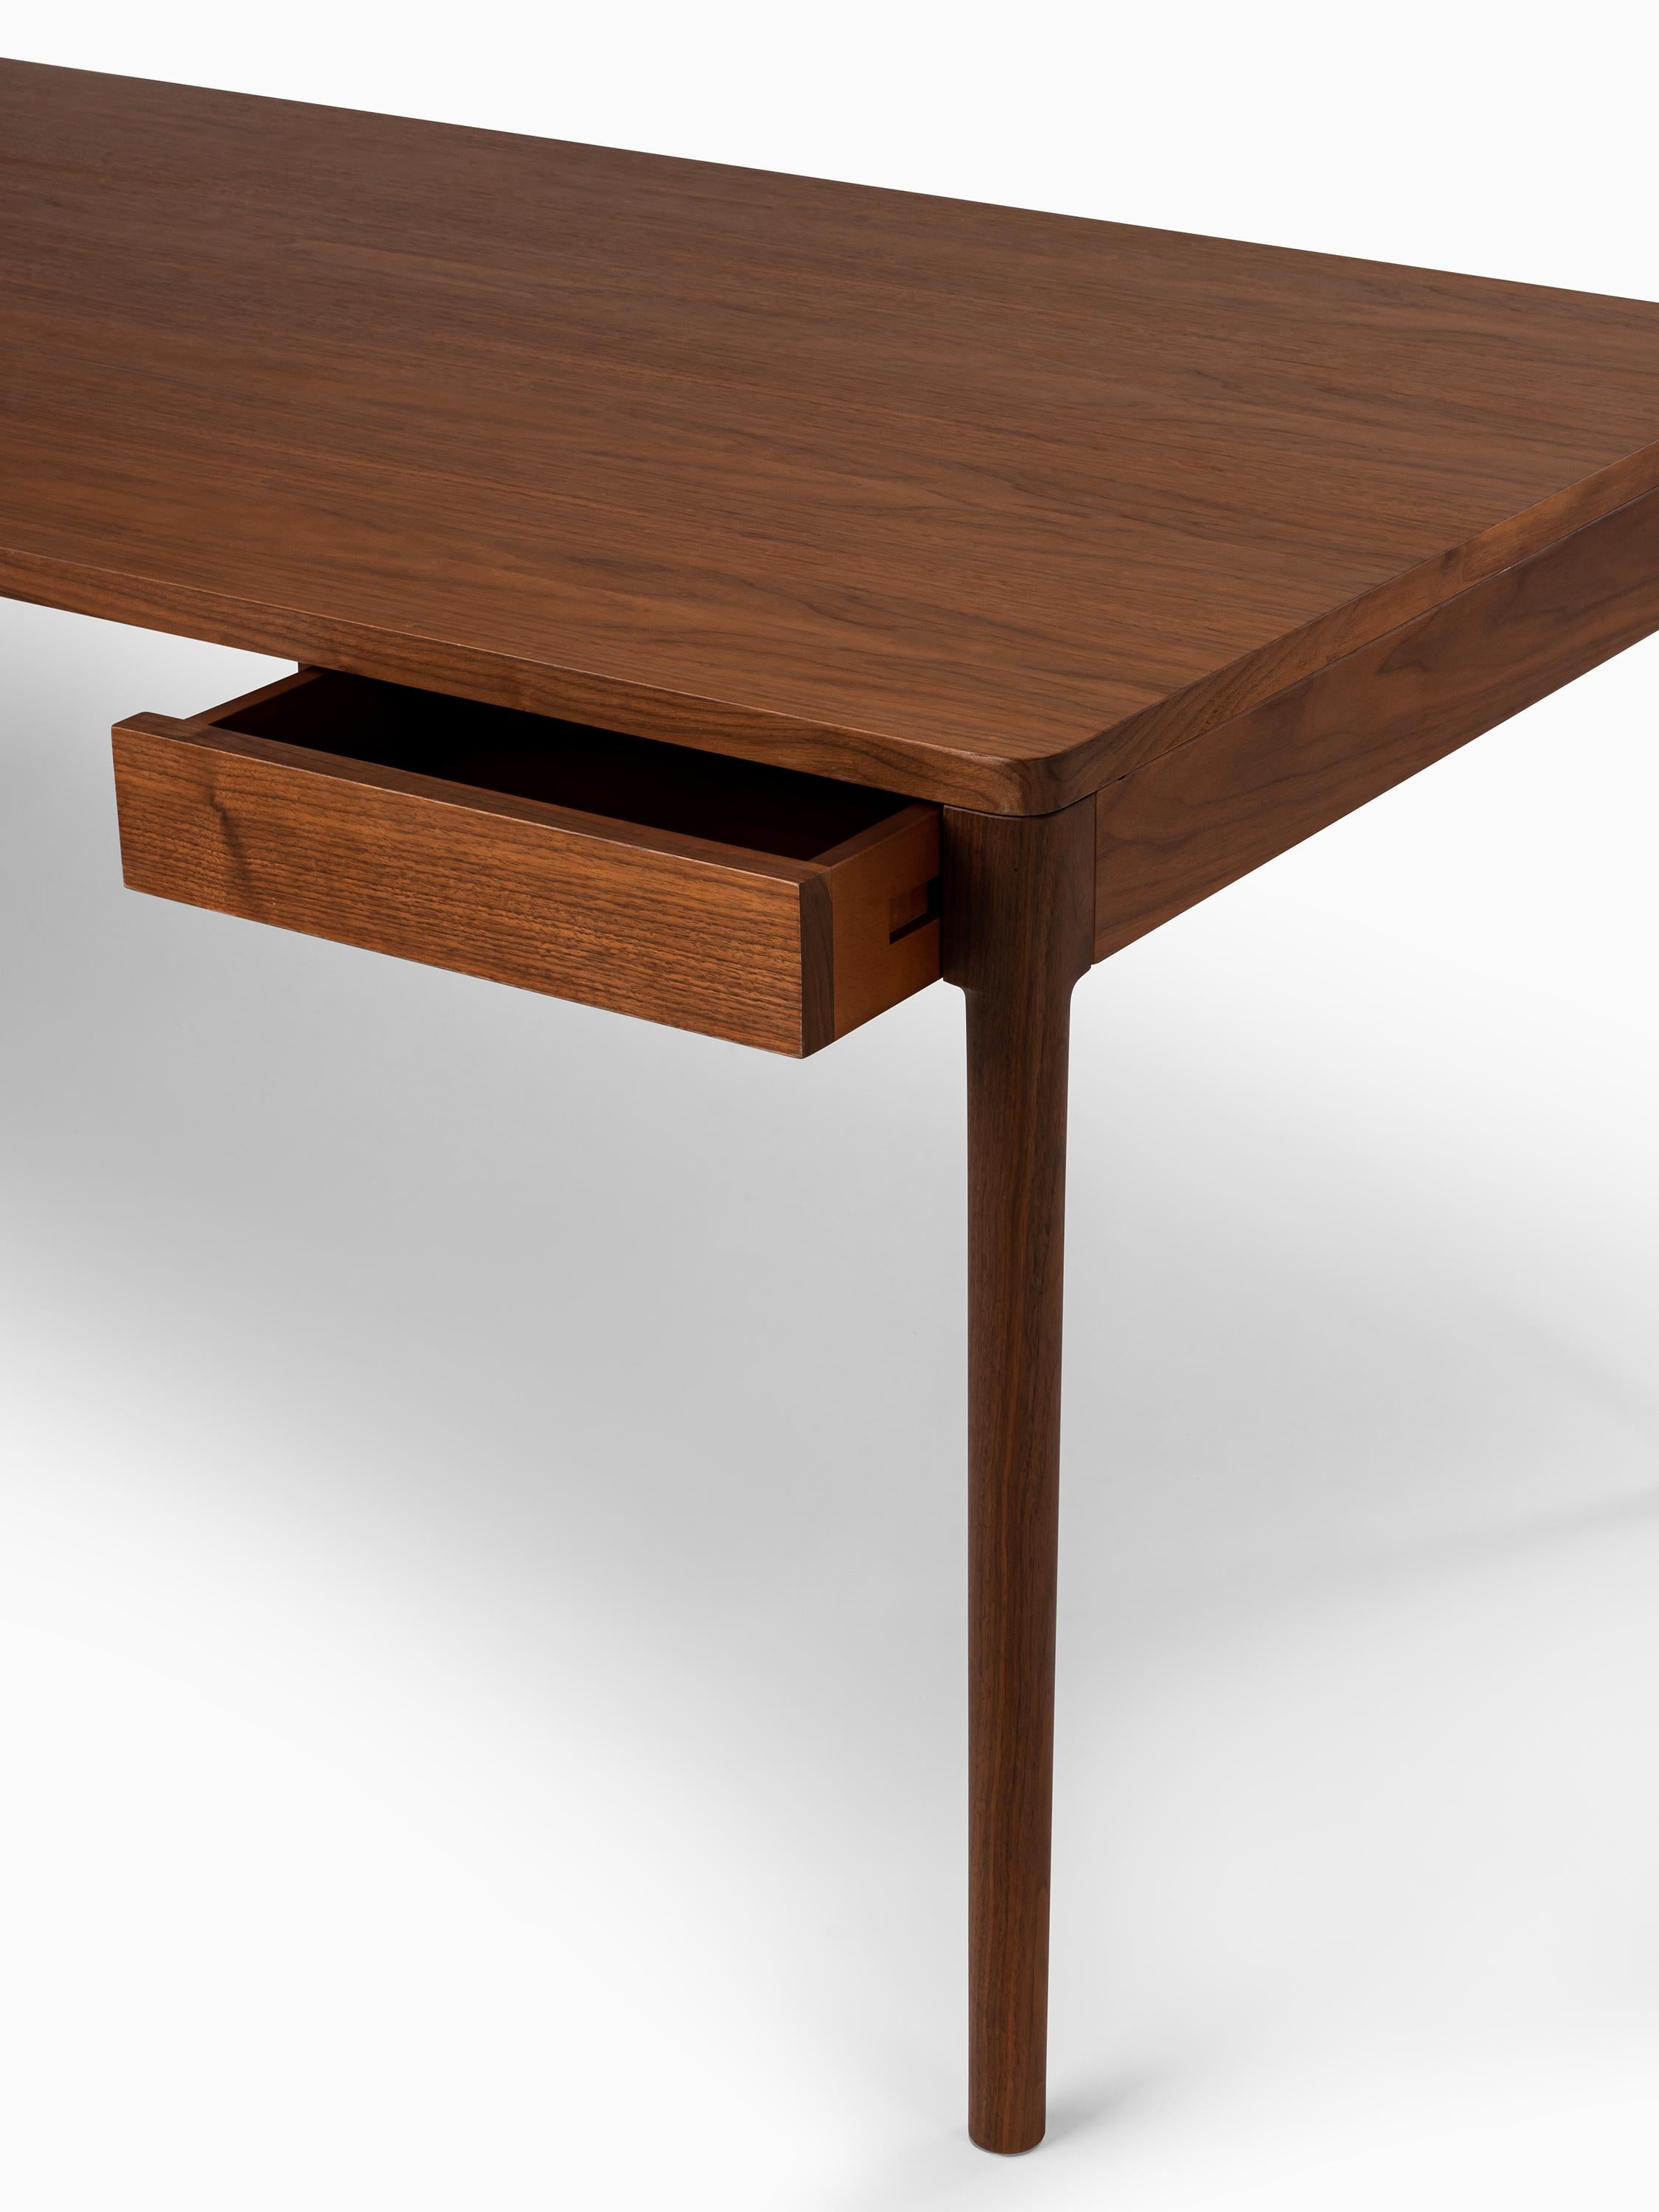 Machine-Made Minimalist Modern Desk in Walnut for Home or Office For Sale